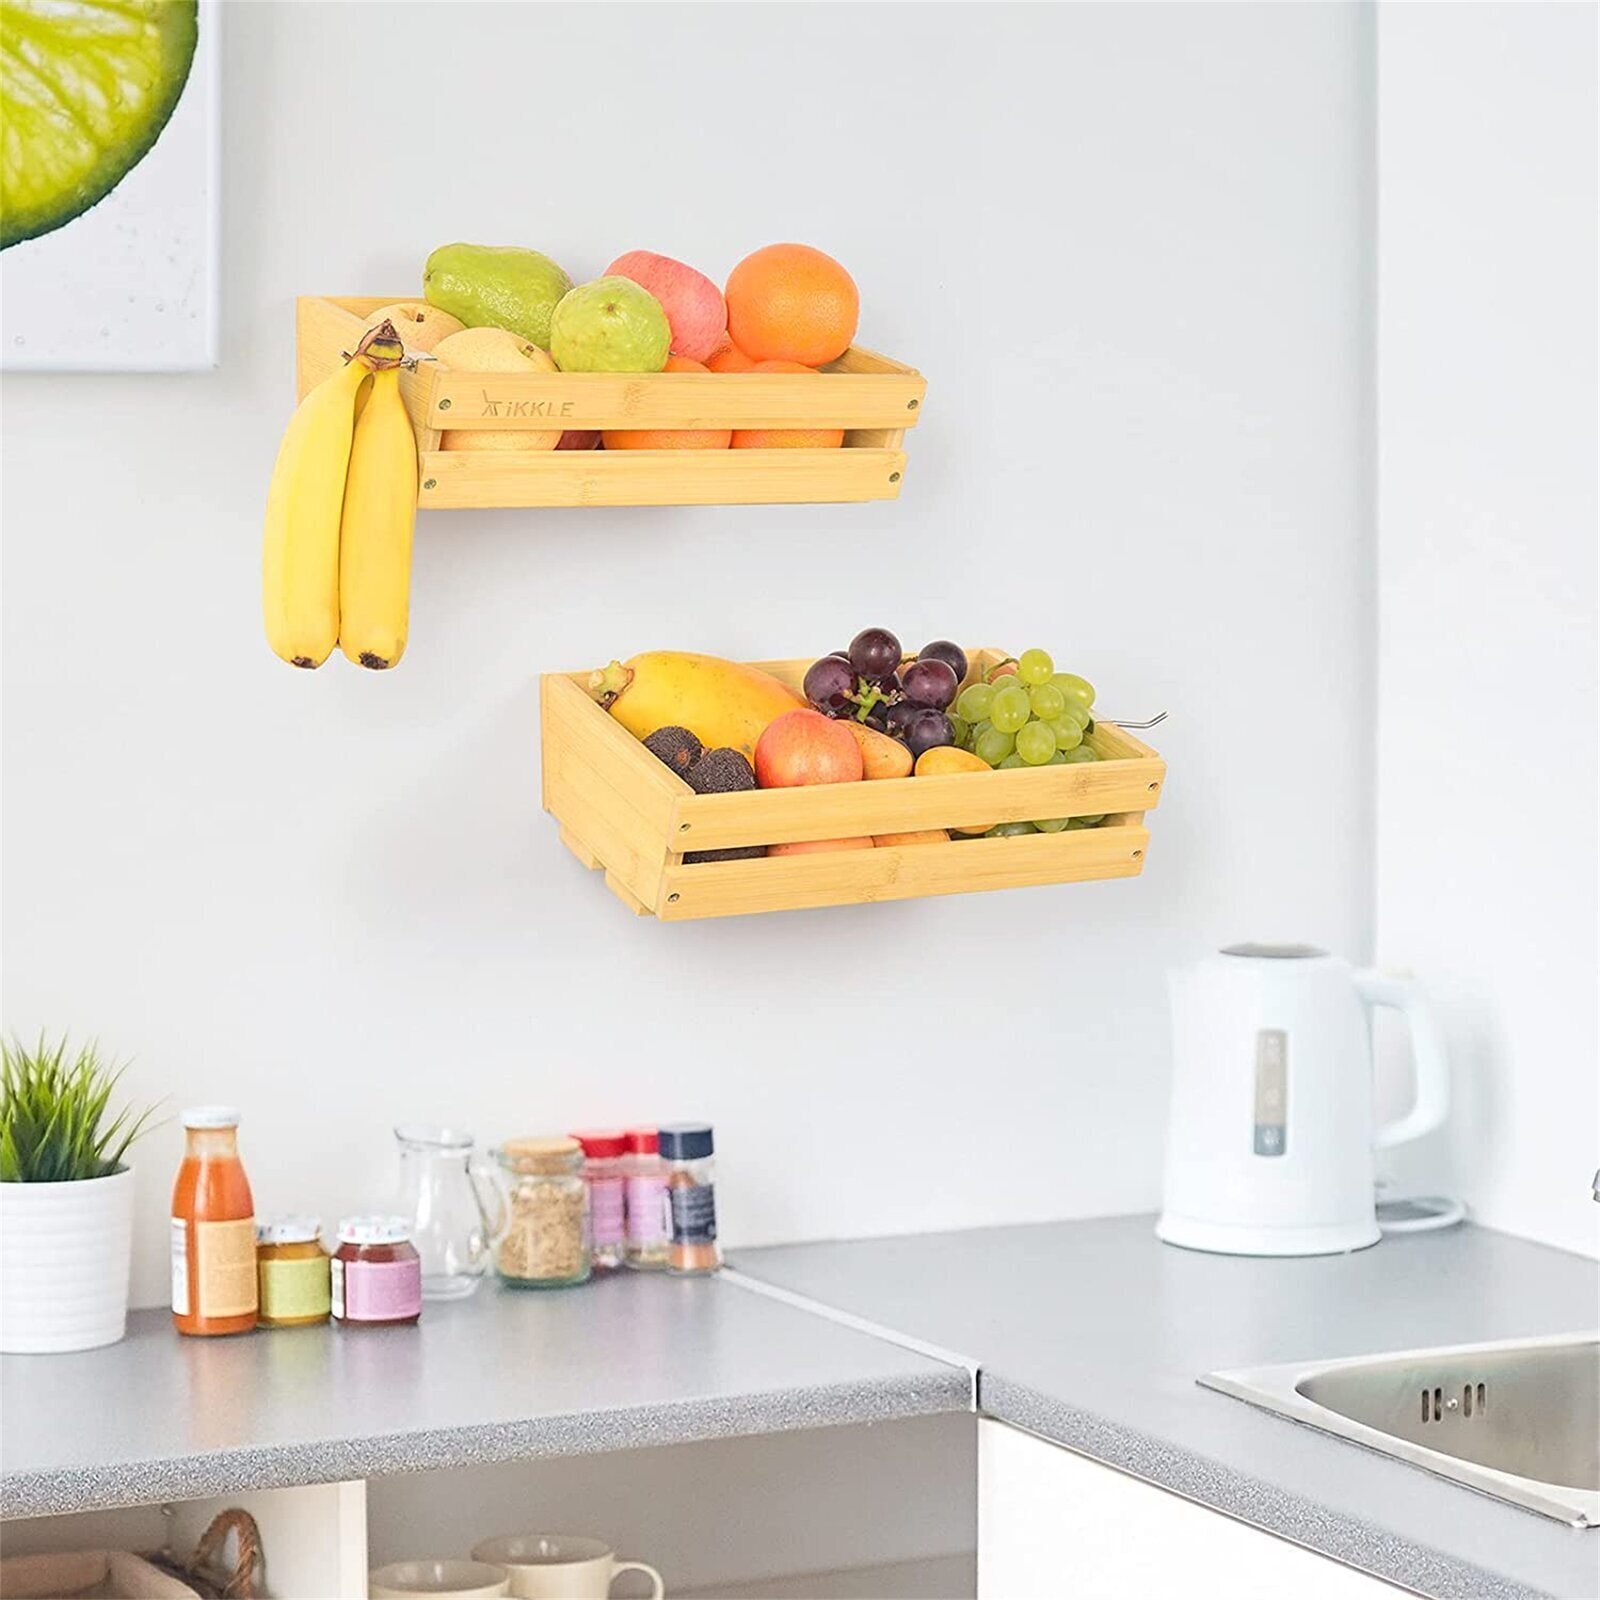 Crate style wall fruit basket 